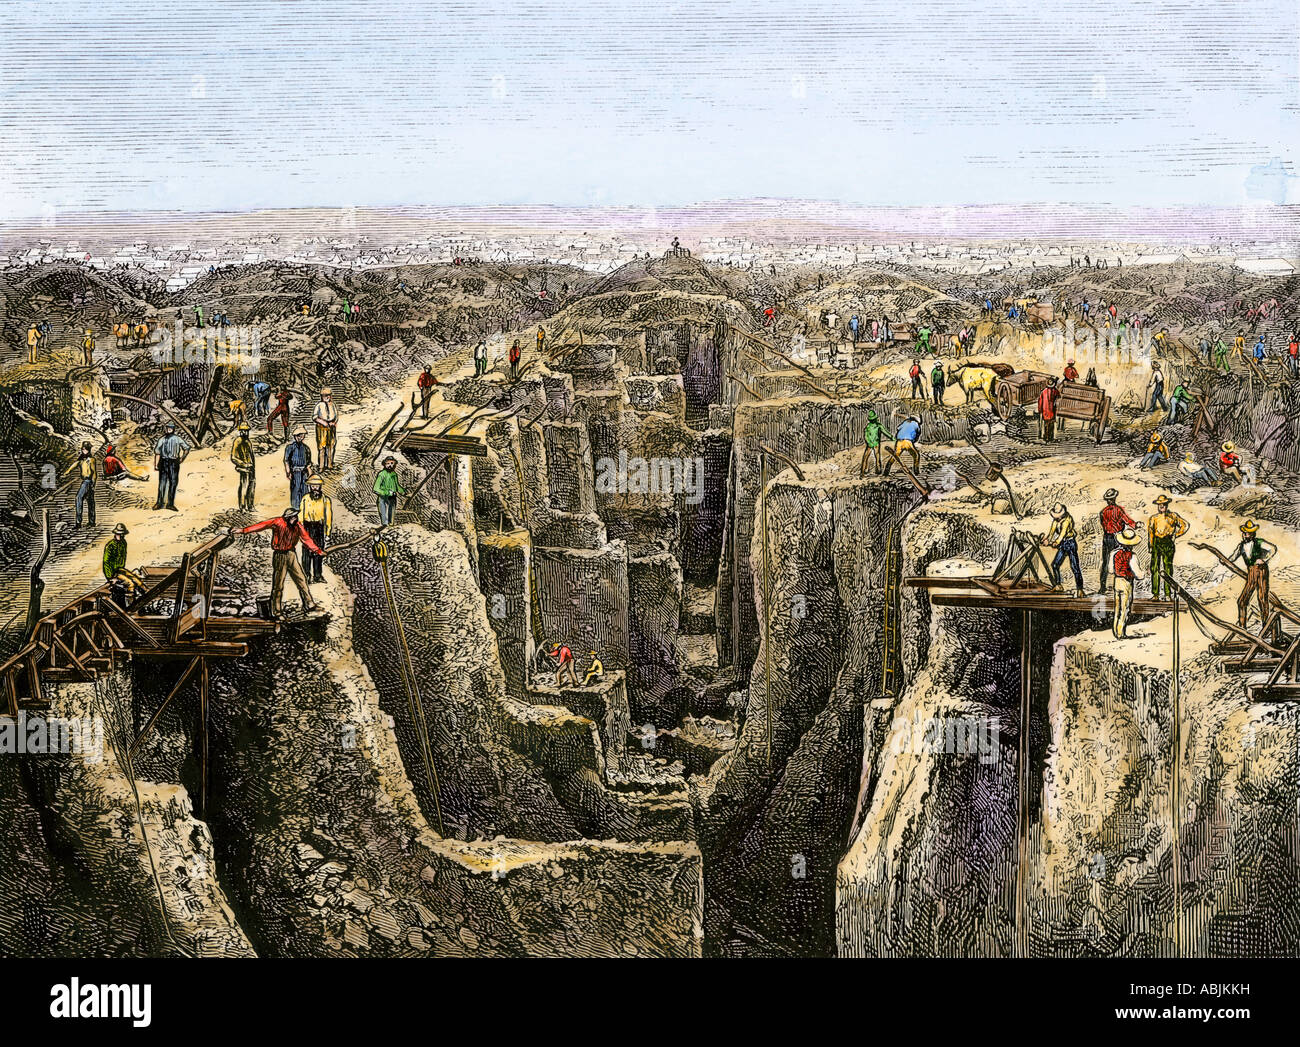 Prospectors working the diamond diggings near Colesberg South Africa 1872. Hand-colored woodcut Stock Photo